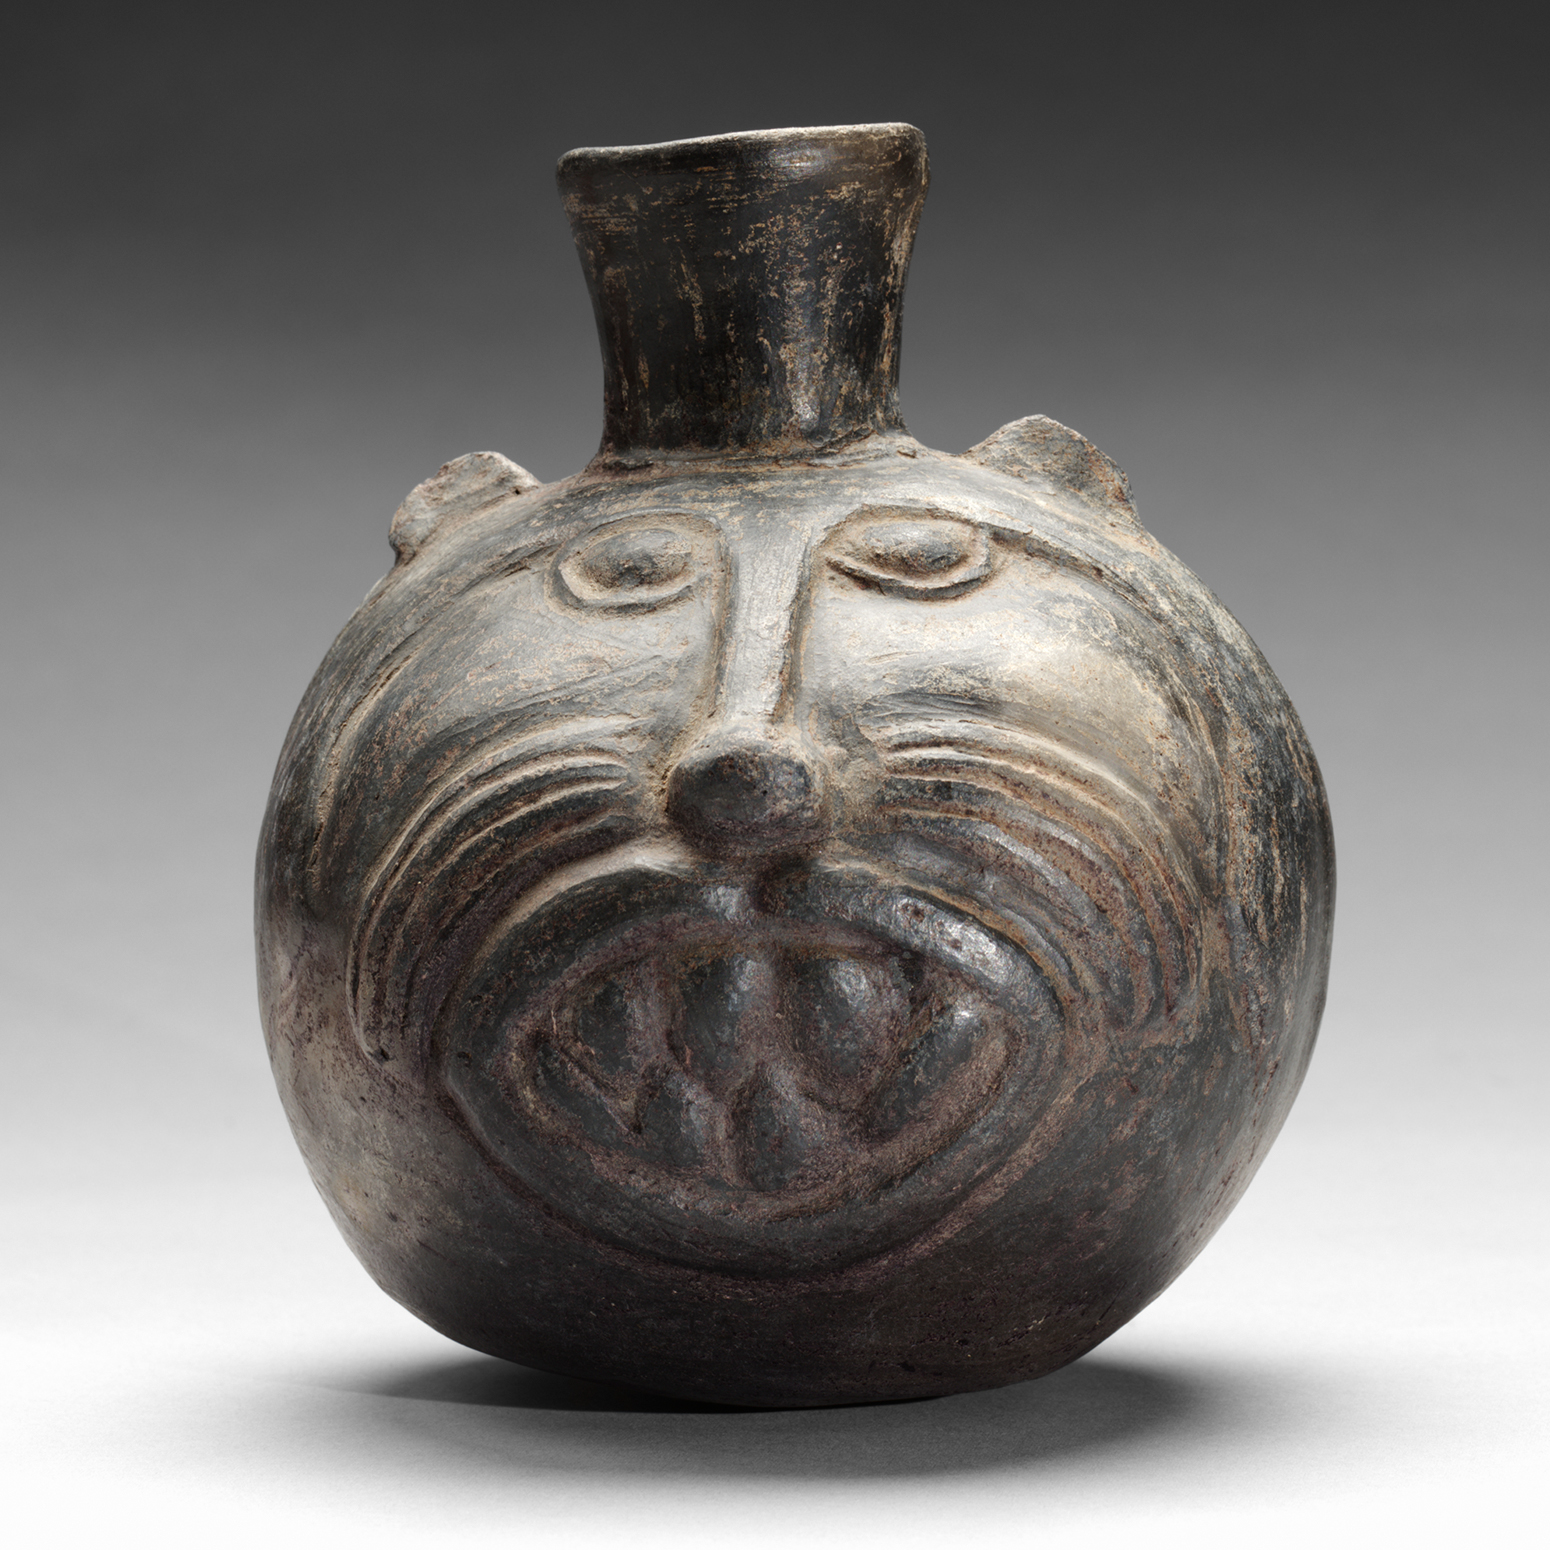 A small dark bottle with an incised feline face